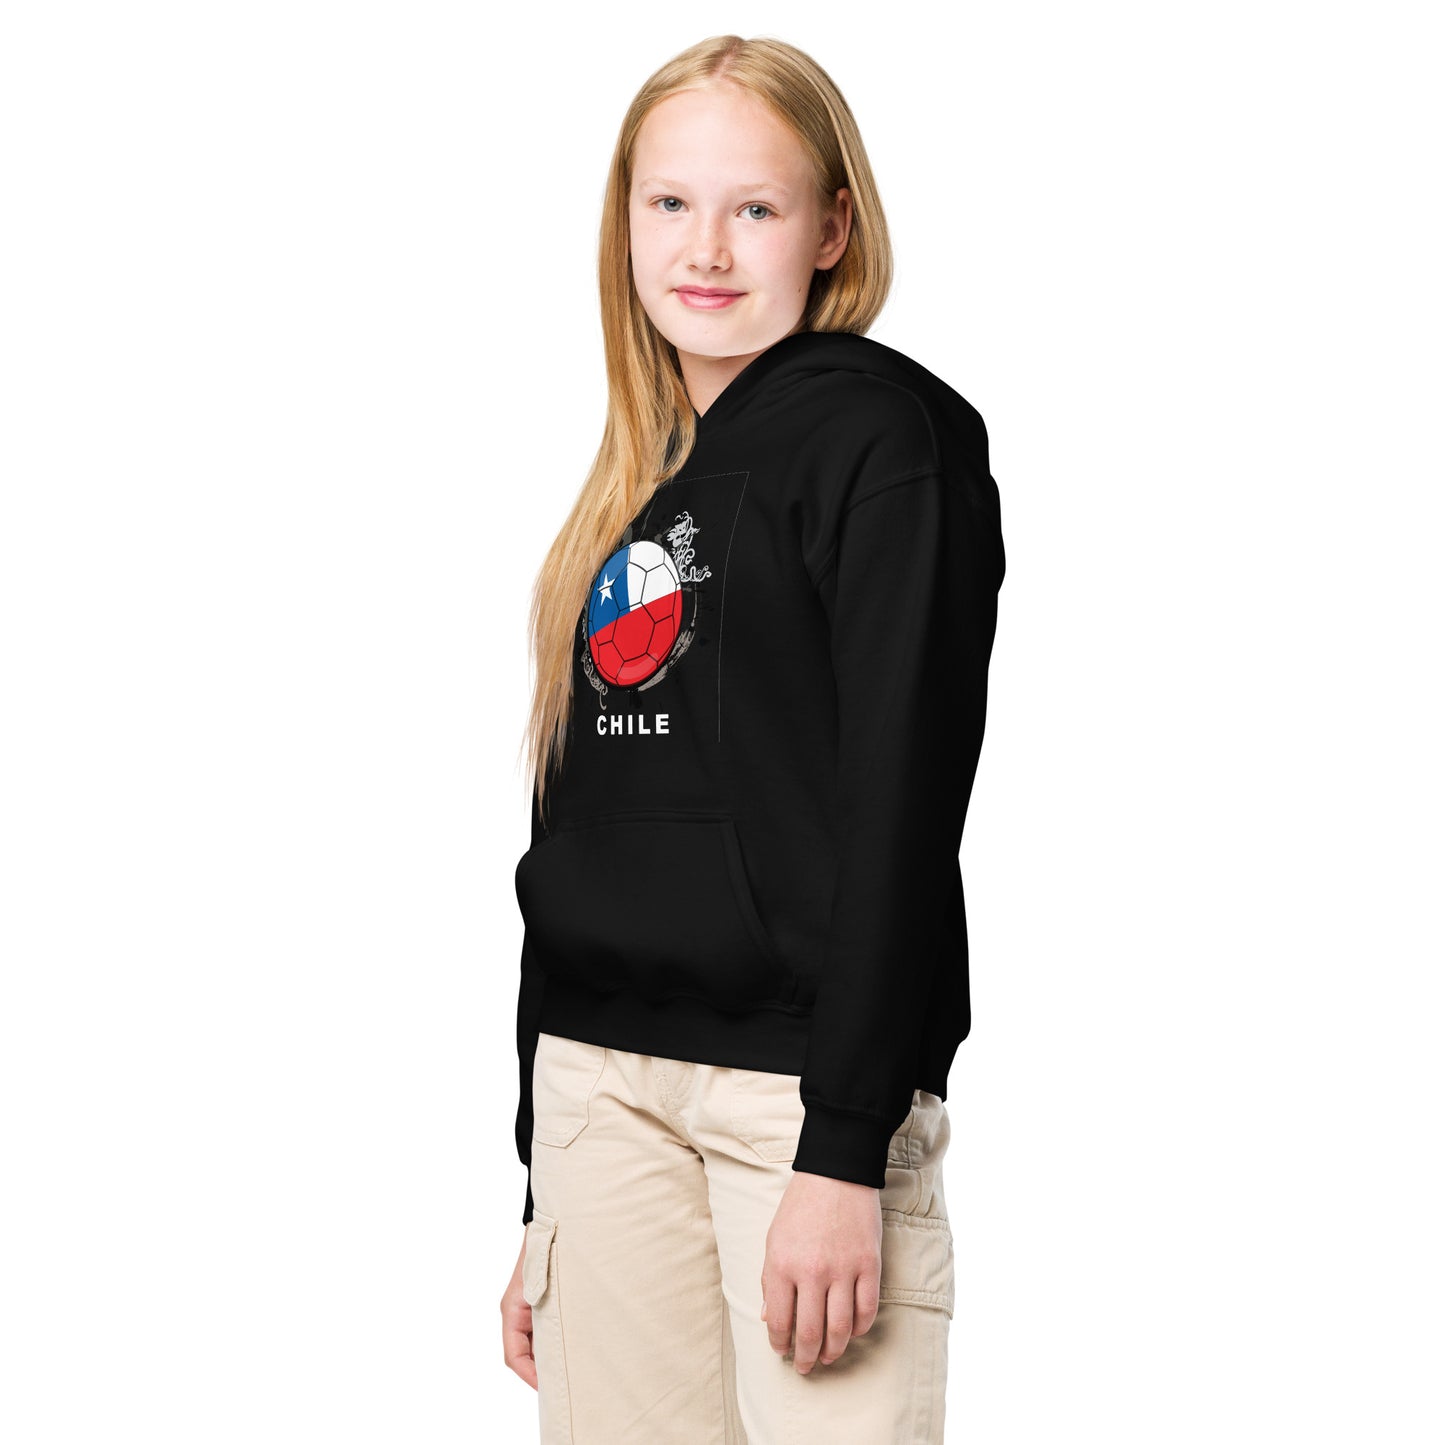 Chili Soccer - Youth heavy blend hoodie - Darks